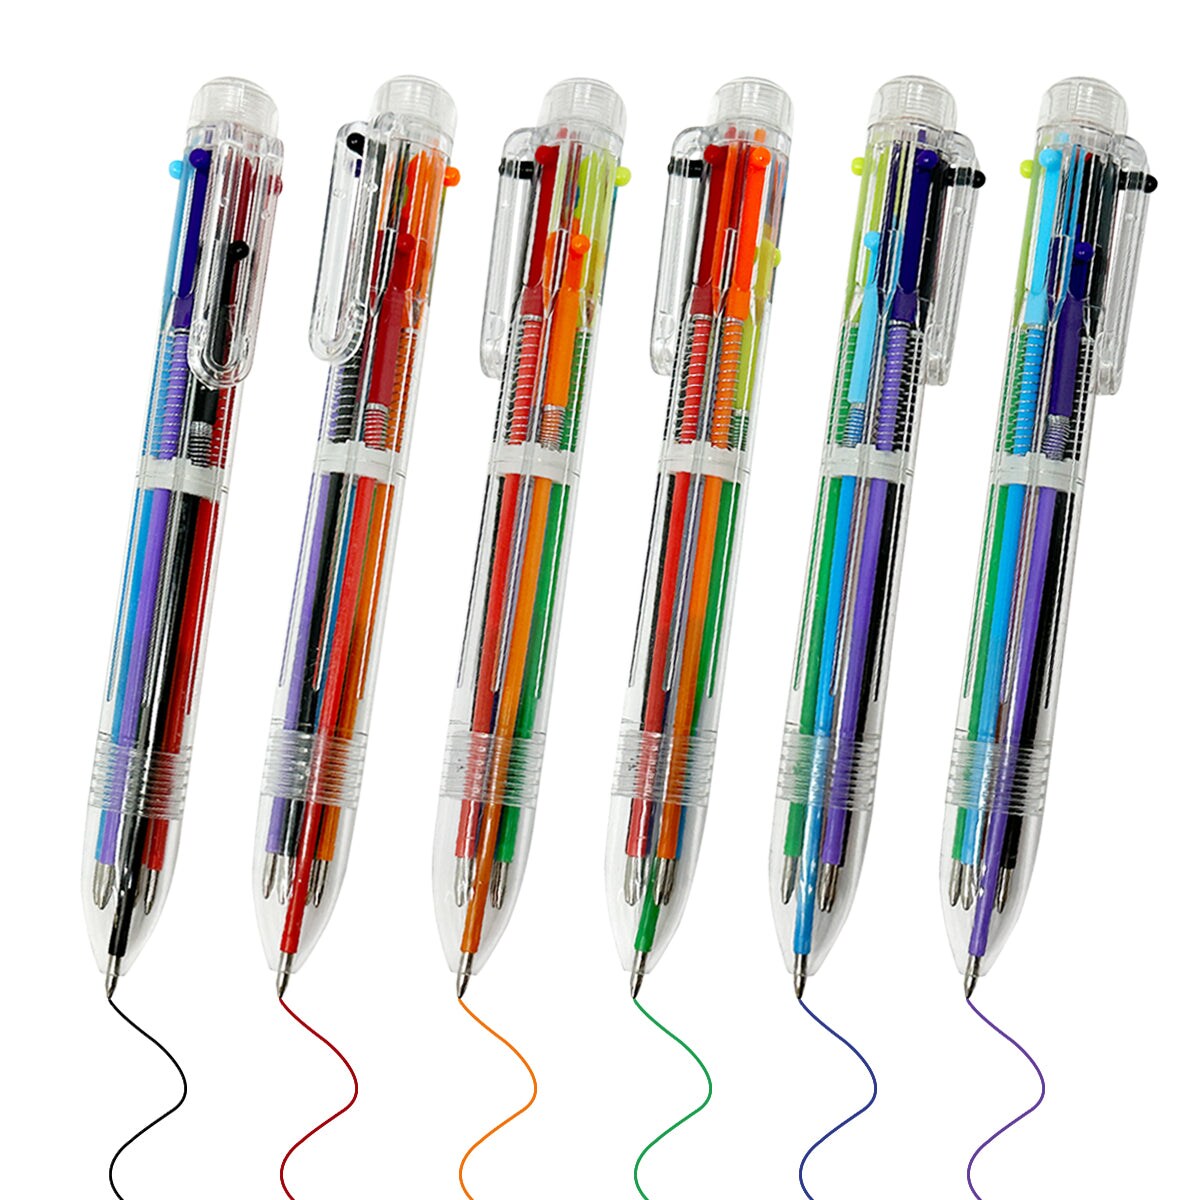 Hieno Supplies Multicolor Pens - 12 Pack of 6-in-1 Retractable Ballpoint Pens - 6 Vivid Colors in Every Pen - Best for Smooth Writing - by Hien